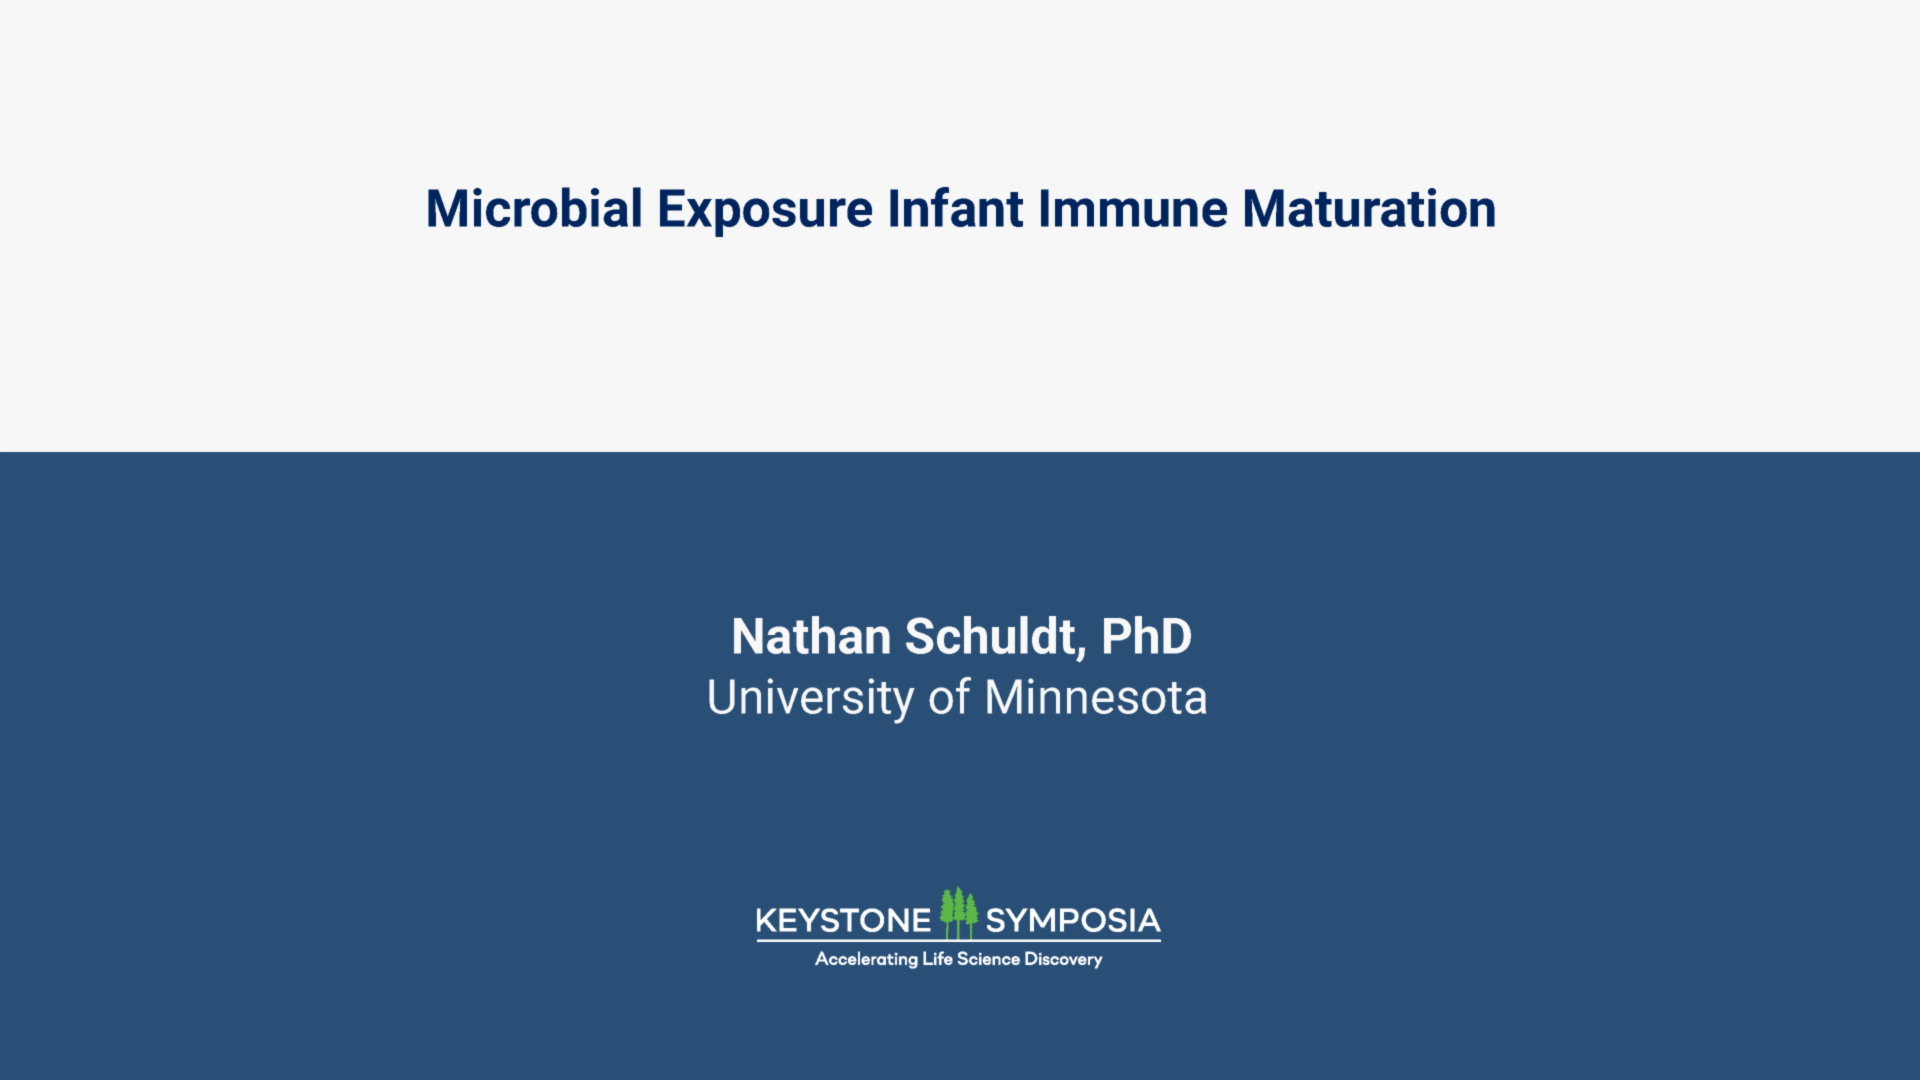 Exposure to diverse microbial flora accelerates the development of infant immunity icon